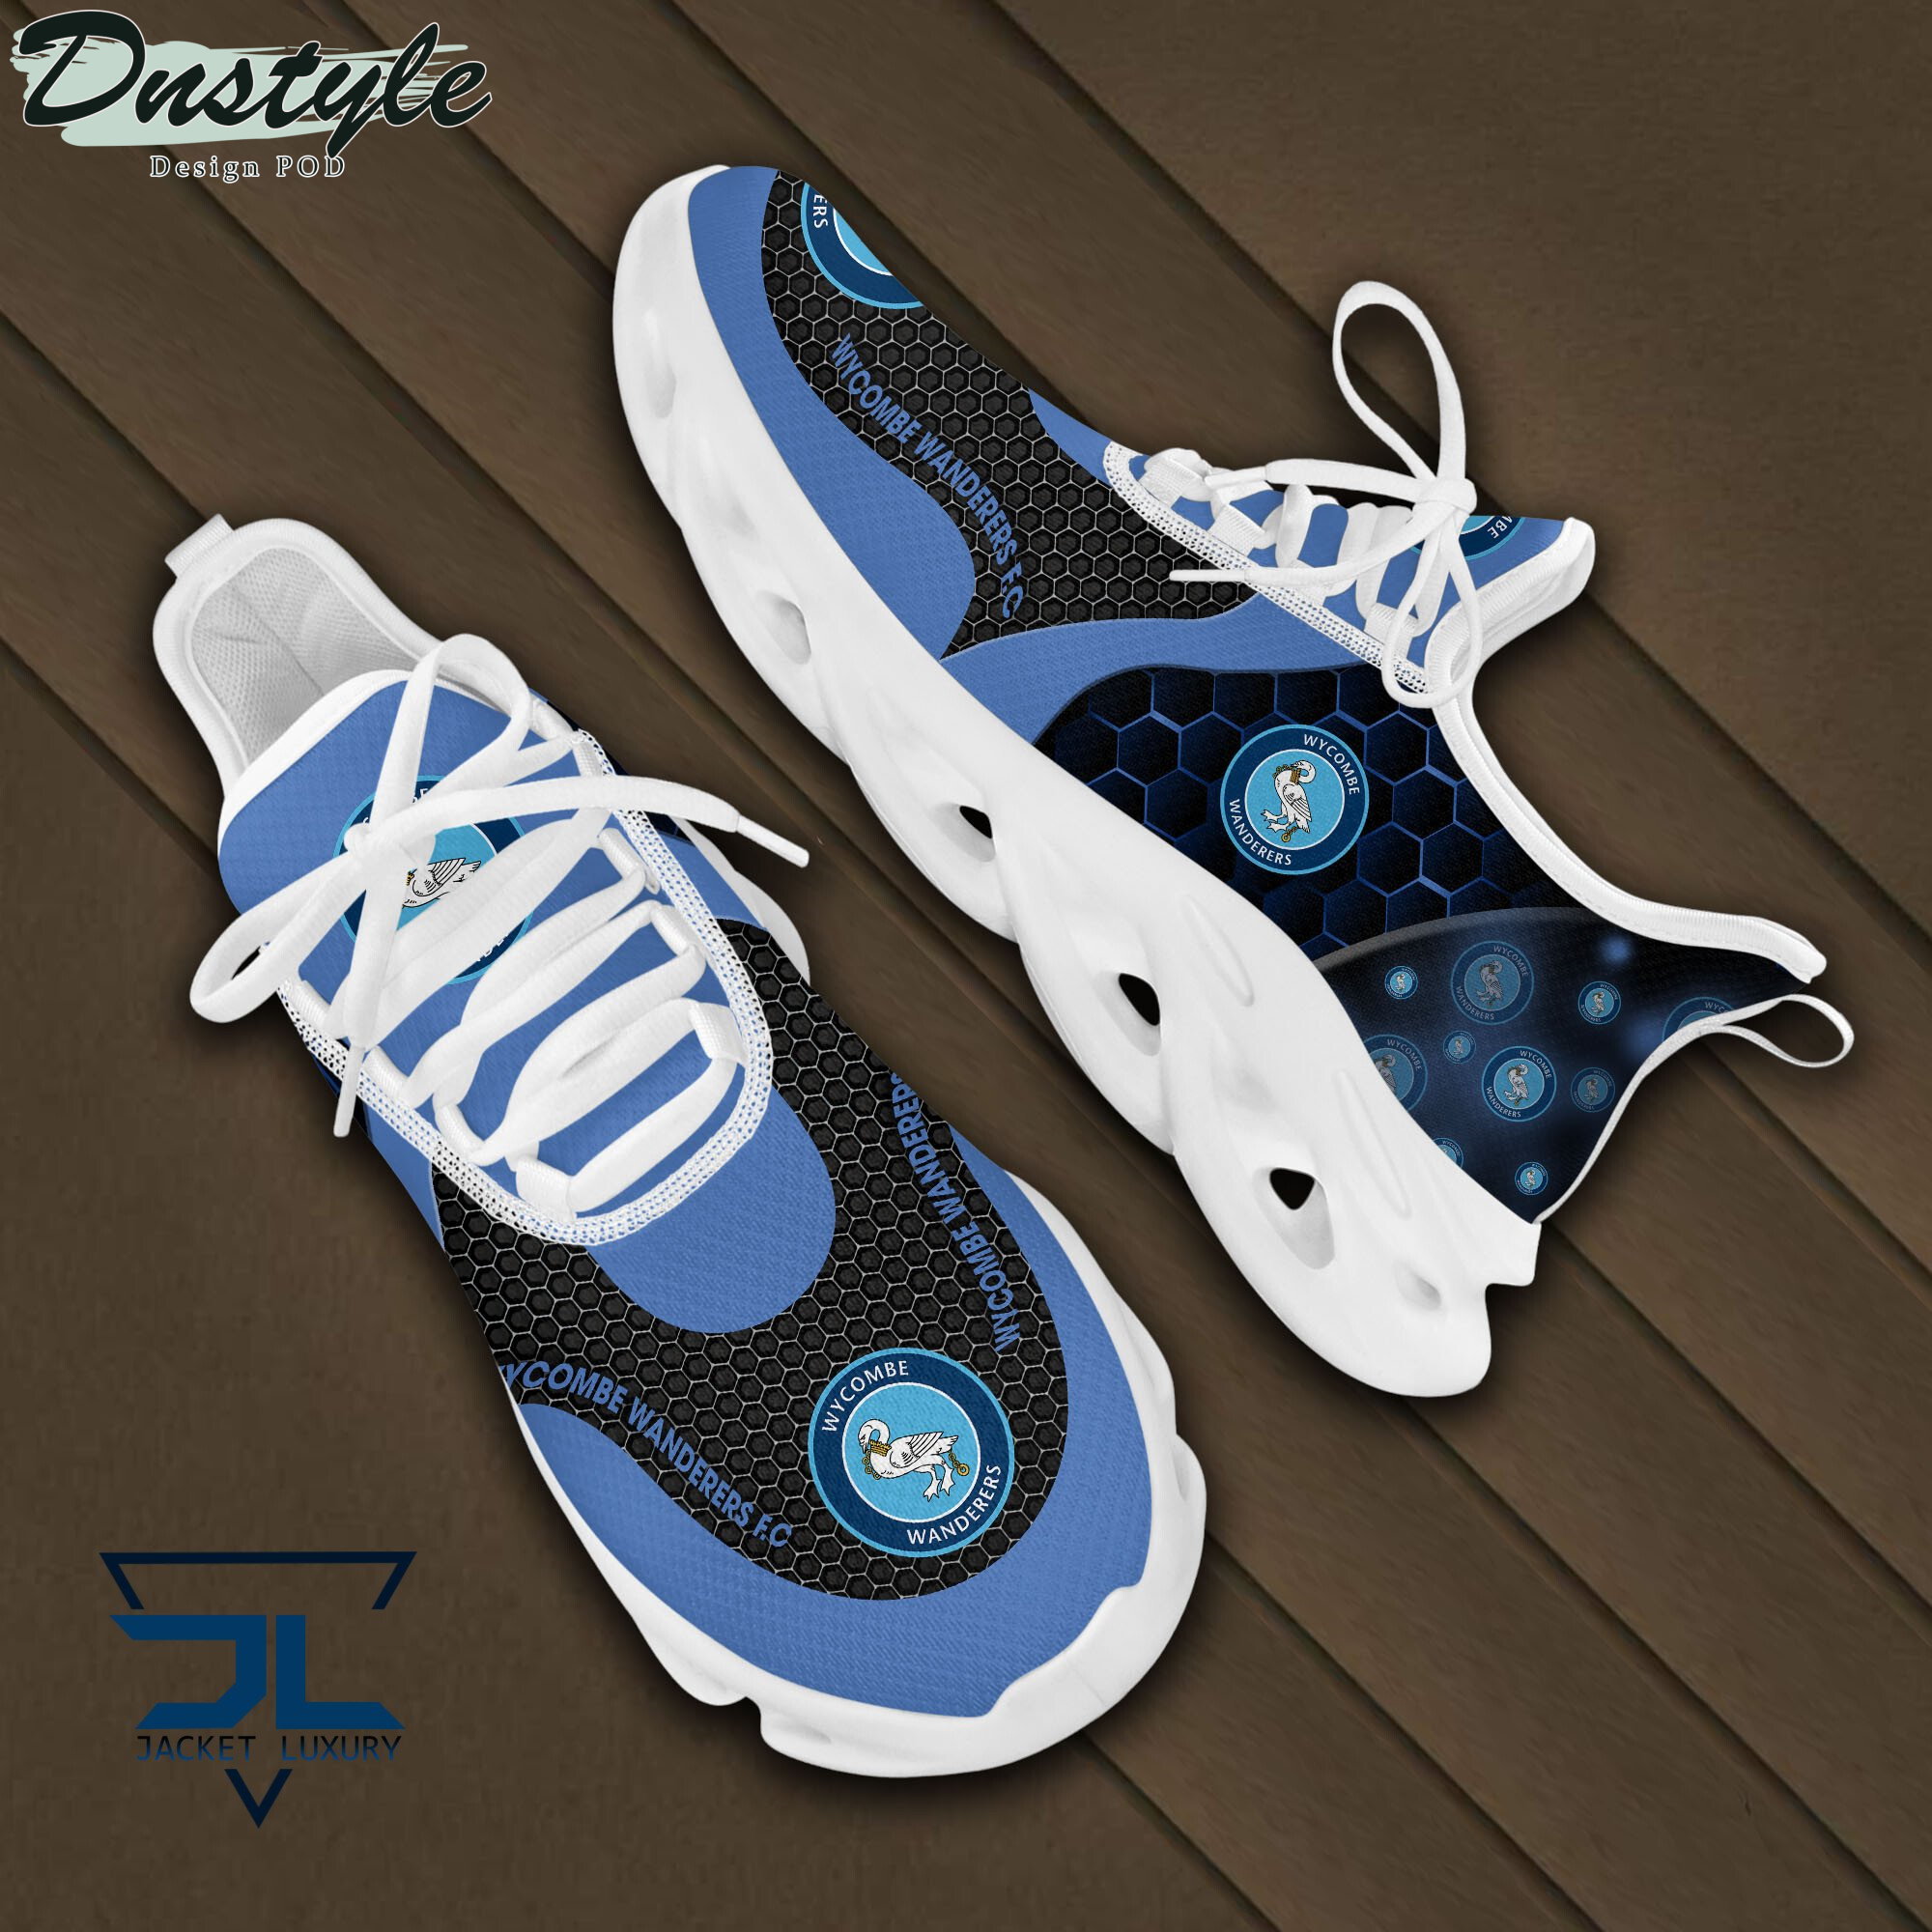 Wycombe Wanderers F.C max soul shoes